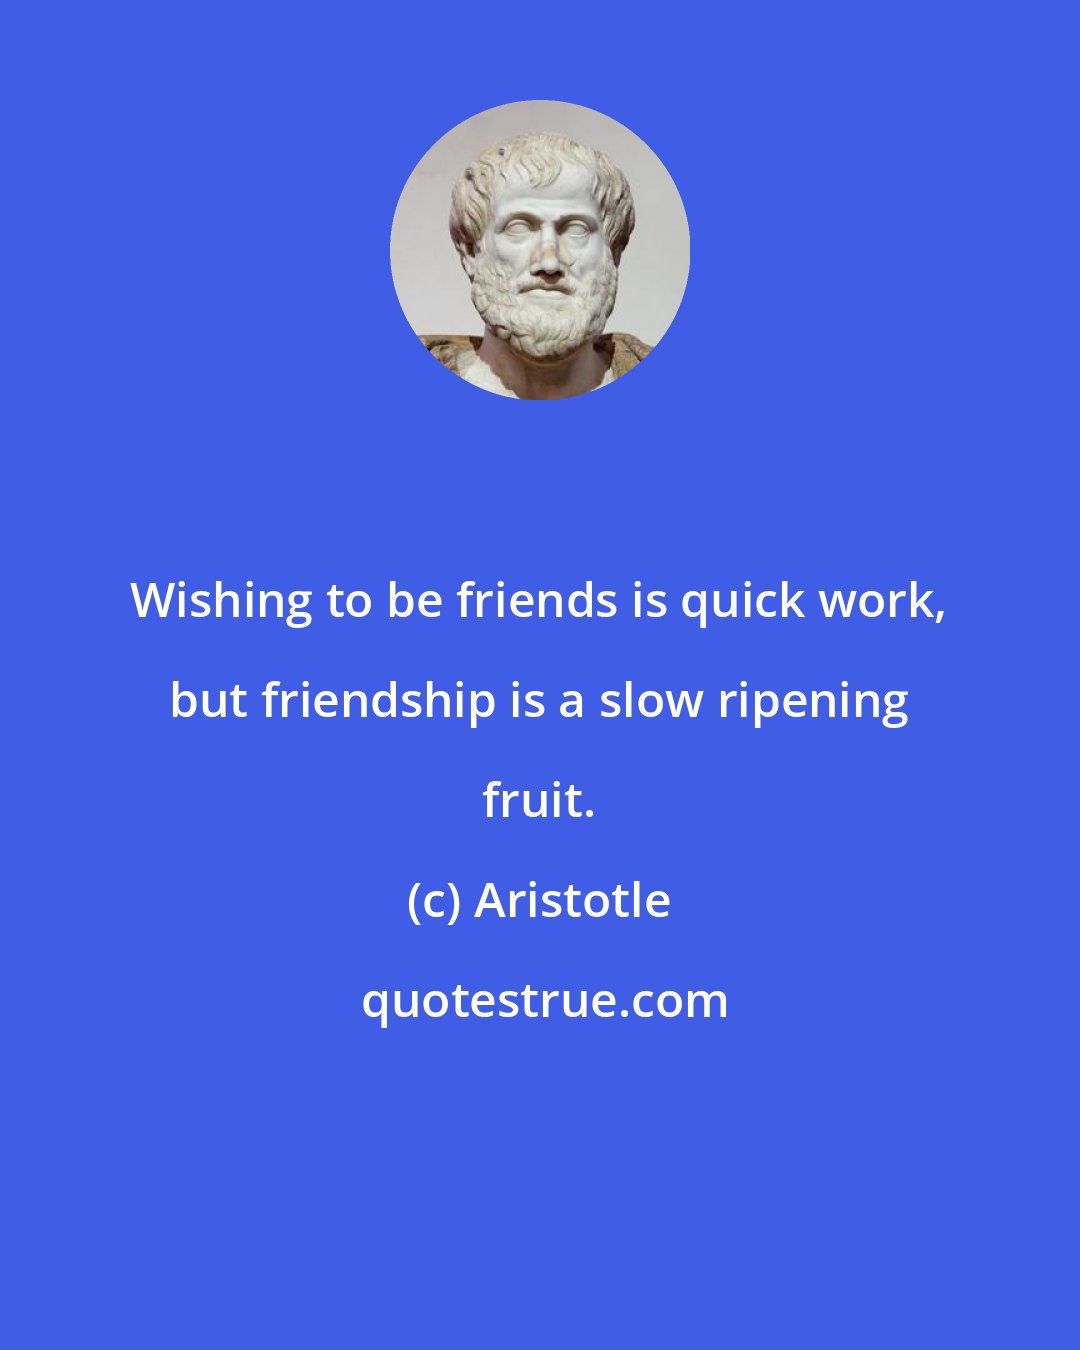 Aristotle: Wishing to be friends is quick work, but friendship is a slow ripening fruit.